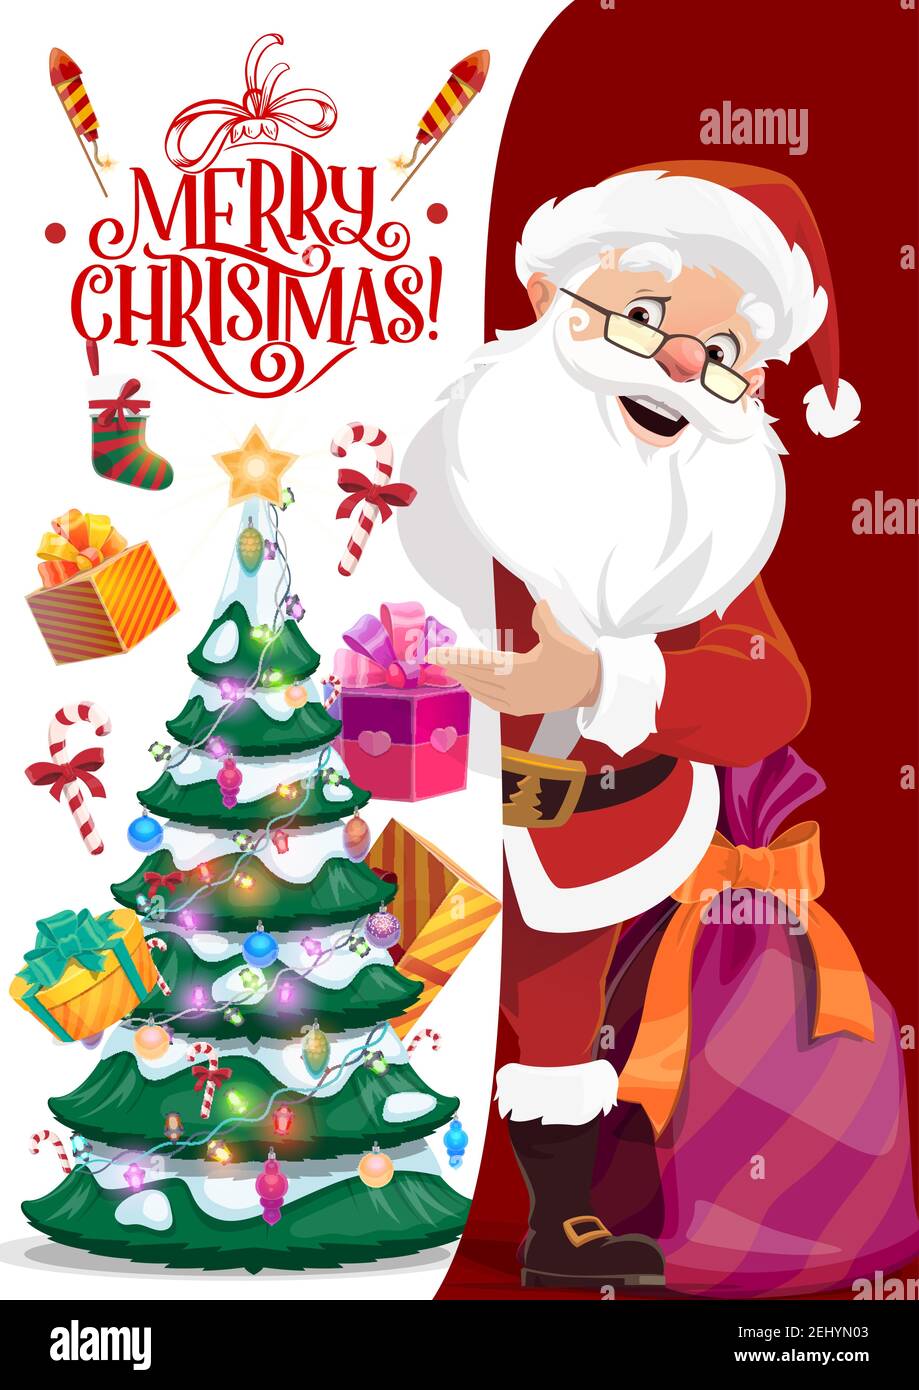 Santa Claus and paper with Merry Christmas wishes, vector Xmas ...